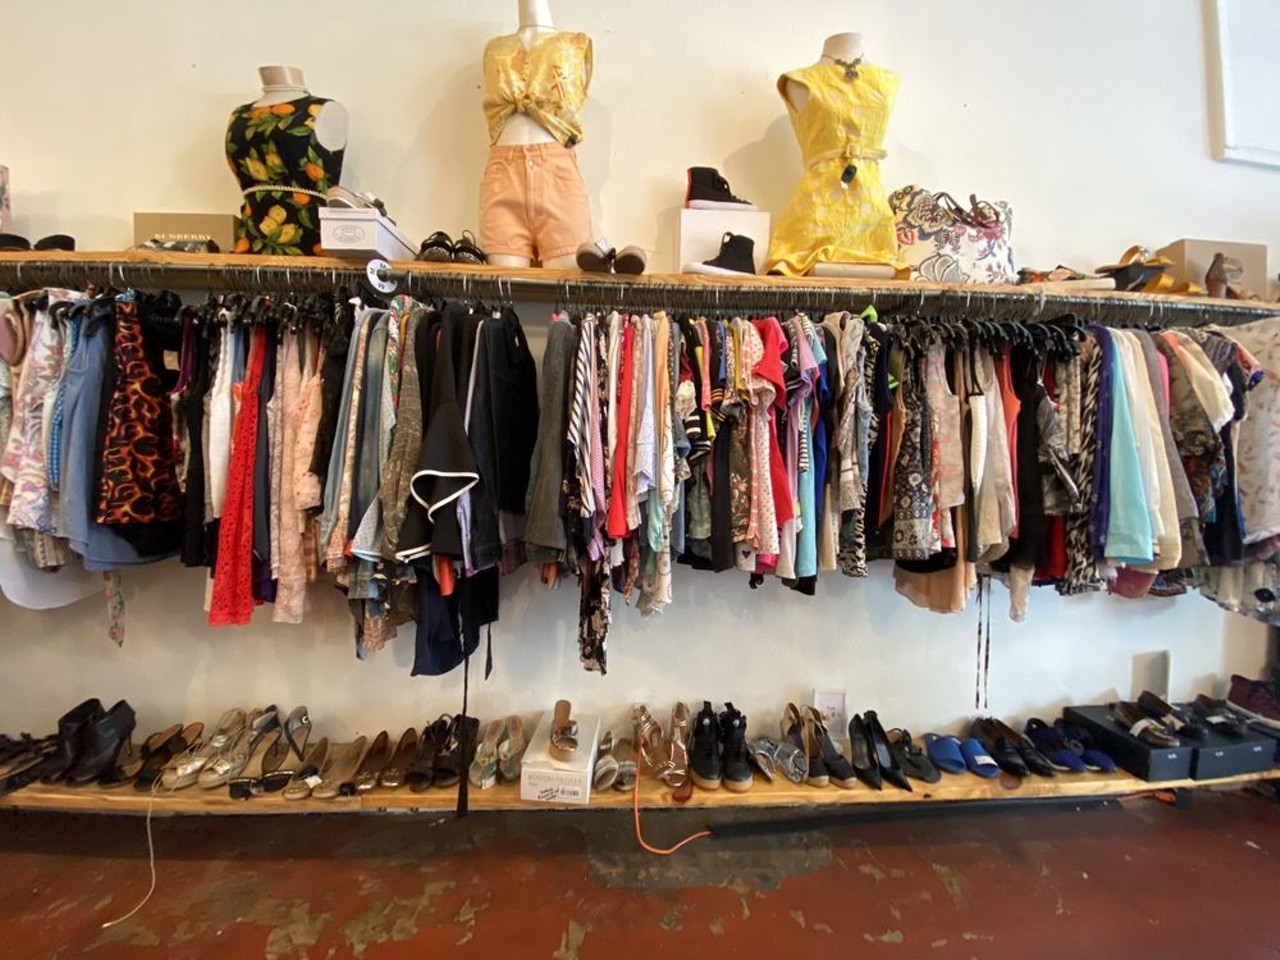 Dechoes Resale
2110 Edgewater Drive, Orlando
This designer consignment and vintage boutique in College Park offers carefully curated vintage and gently used designer finds in a funky space.